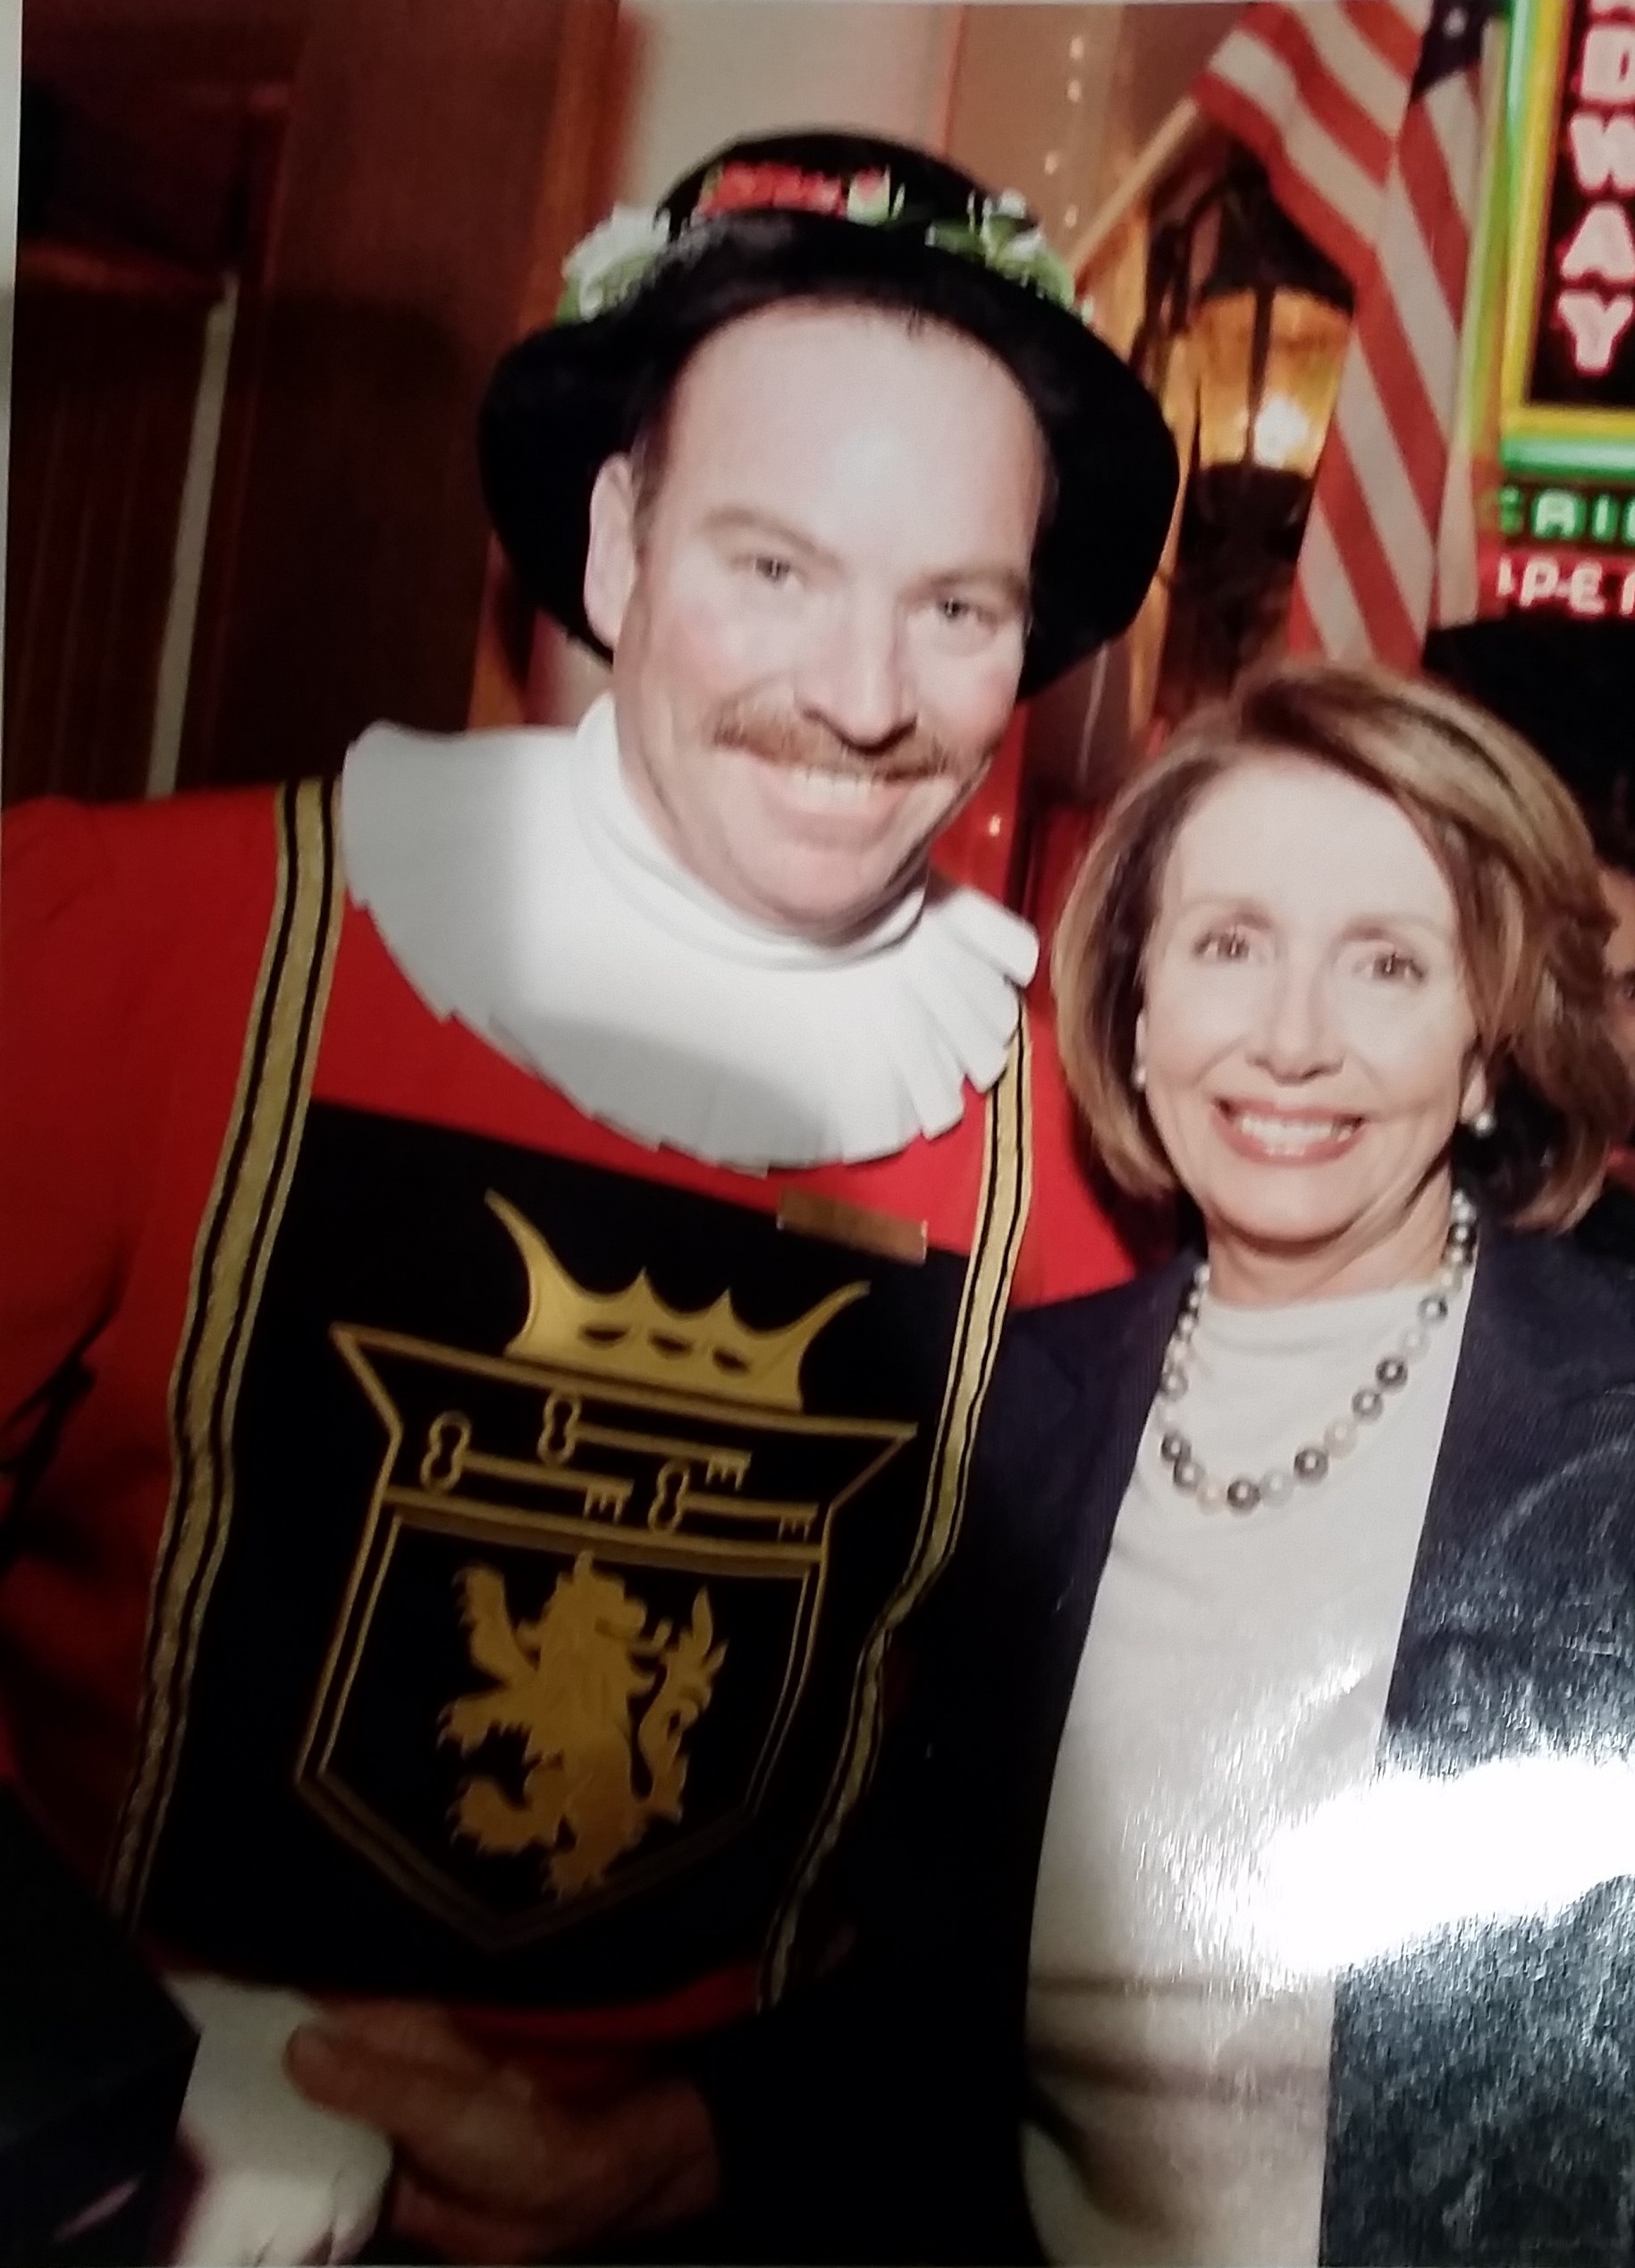  With Nancy Pelosi, trying to look OK with someone putting a drink down without a coaster 